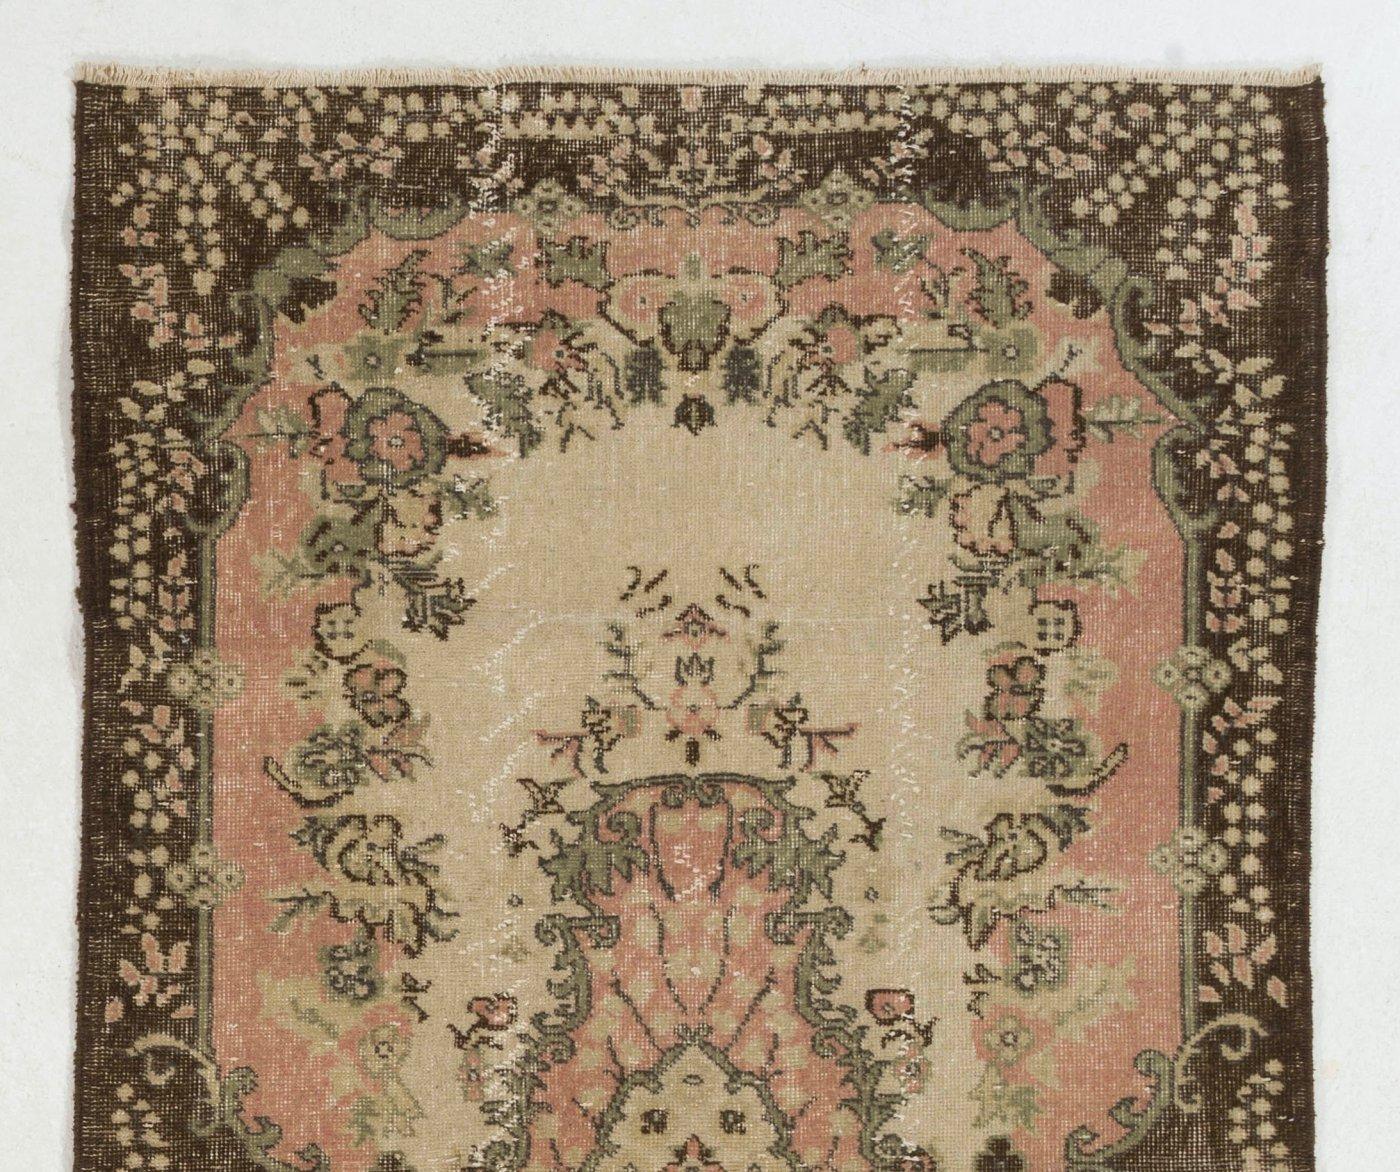 A finely hand-knotted vintage Turkish carpet from 1960s featuring a floral medallion design. The rug has even low wool pile on cotton foundation. It is heavy and lays flat on the floor, in very good condition with no issues. It has been washed